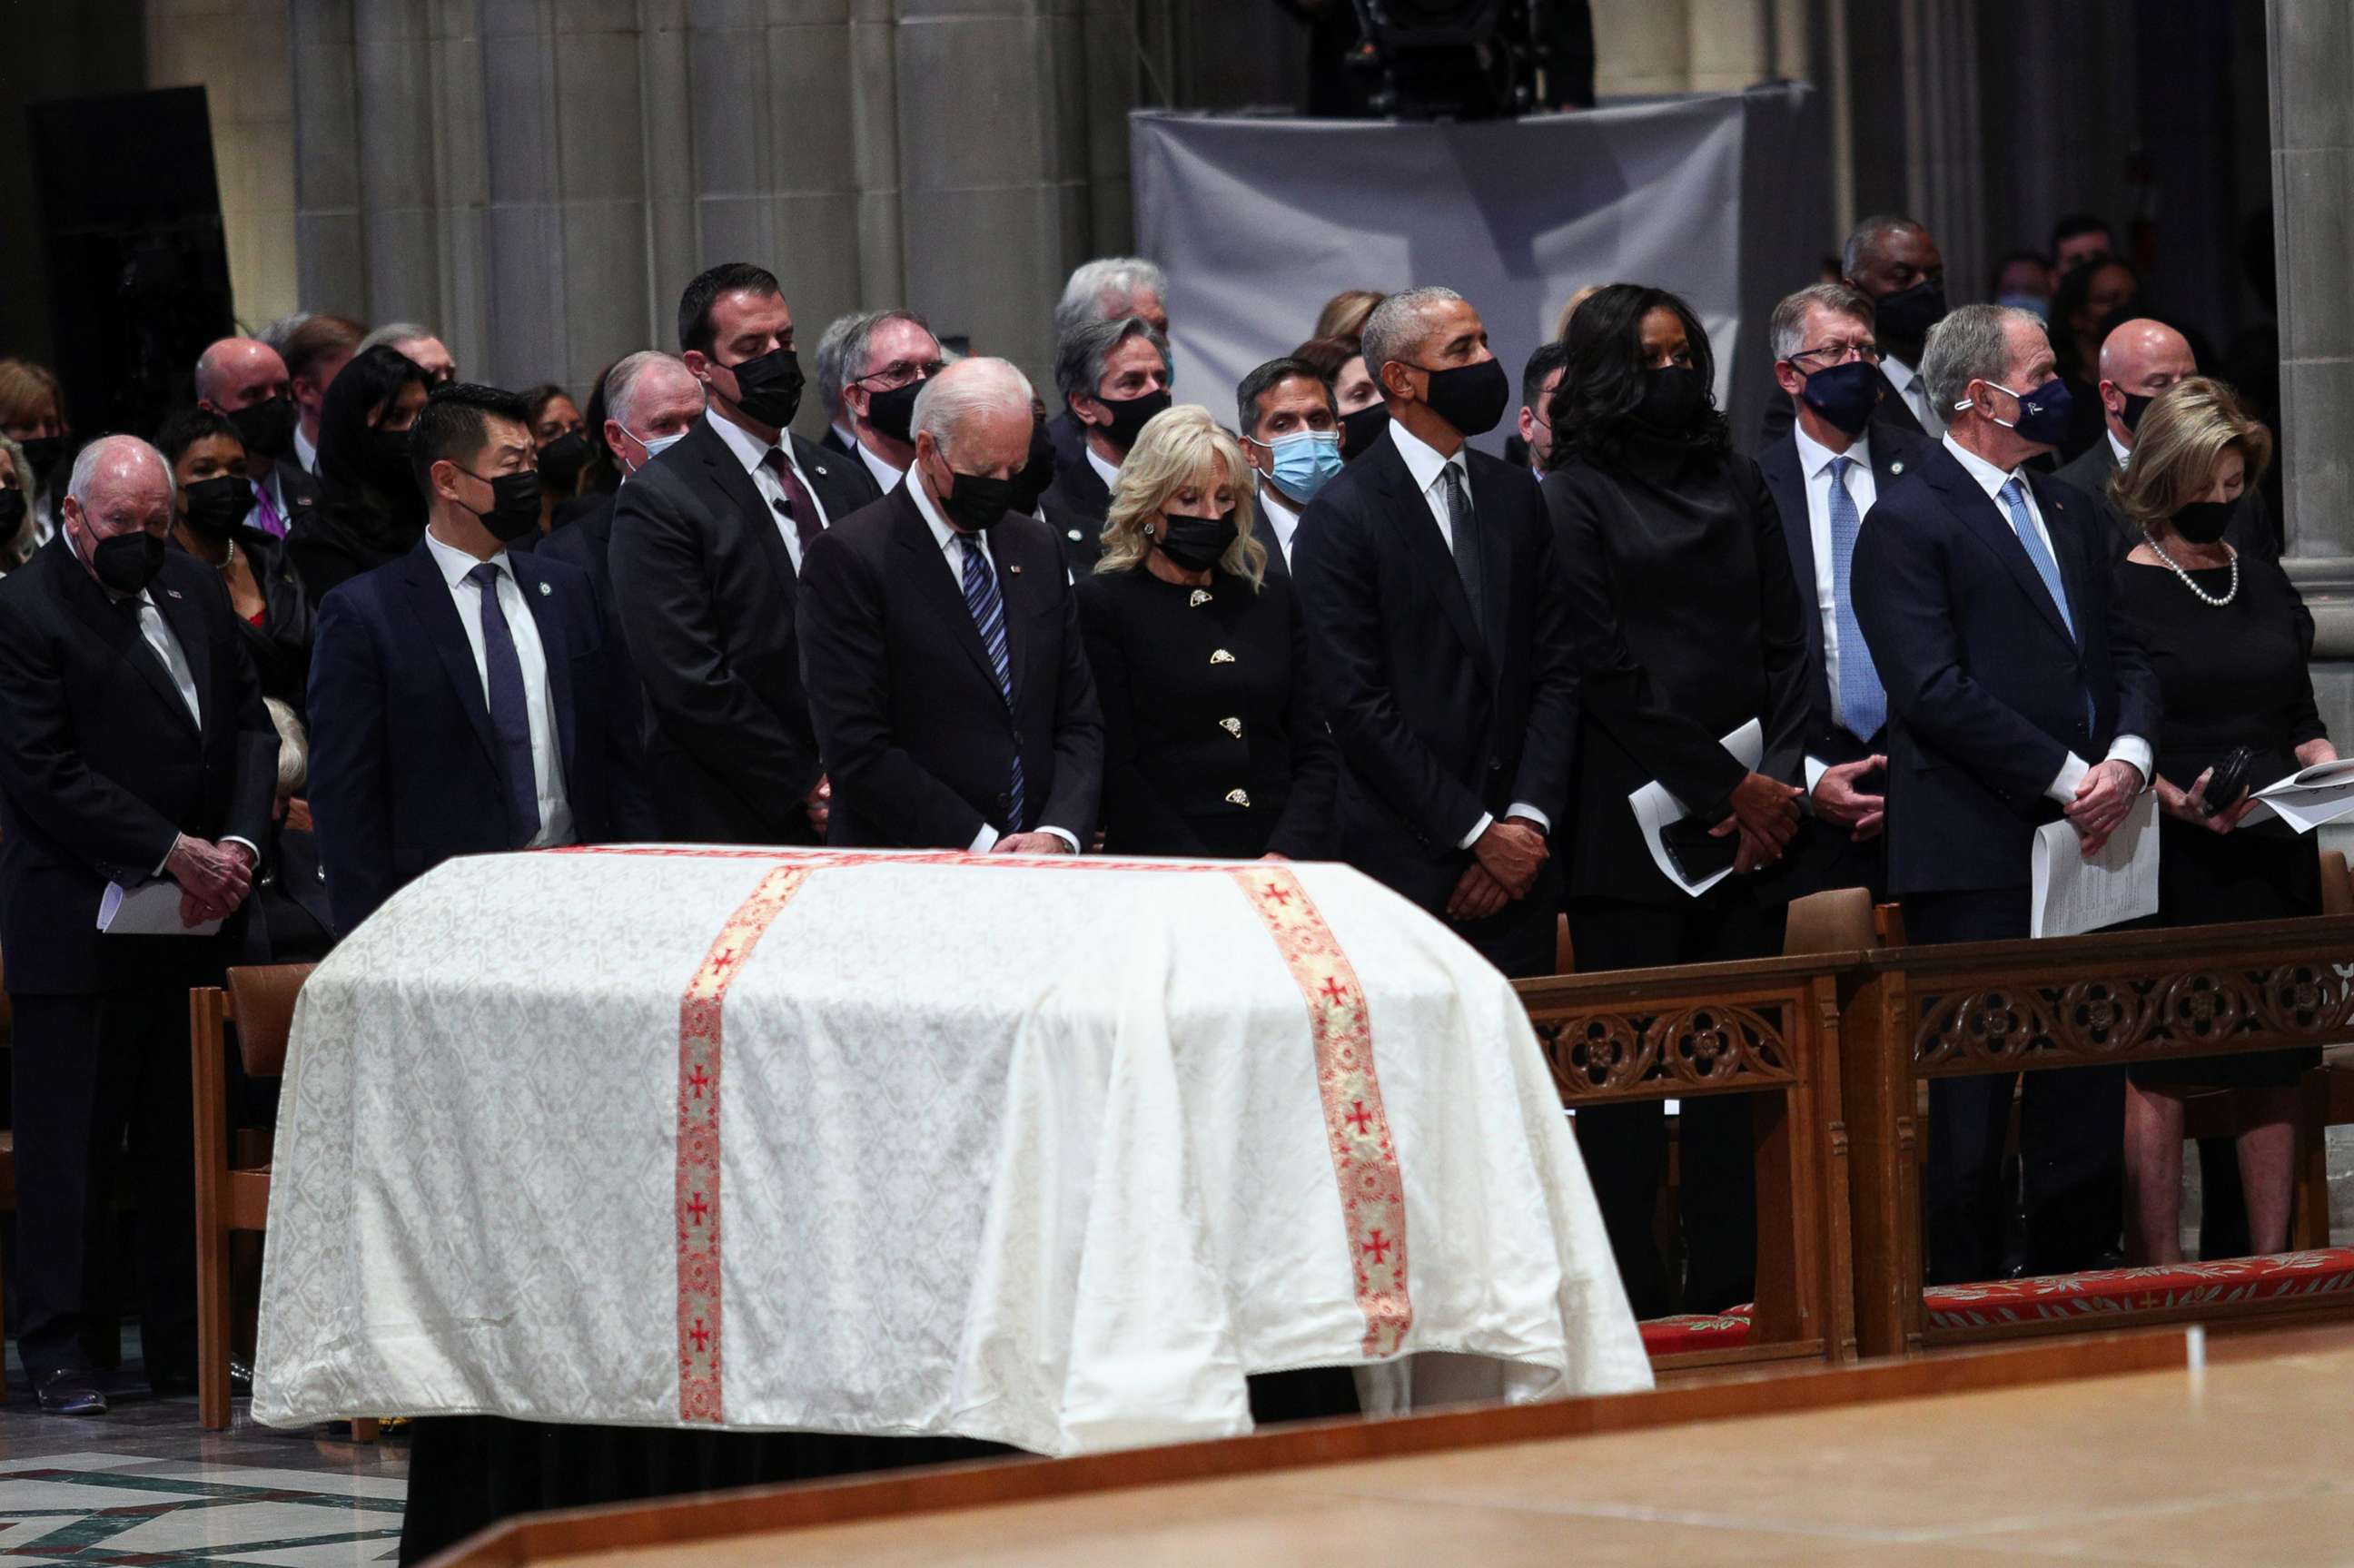 PHOTO: President Joe Biden, his wife Jill Biden, former President Barack Obama and his wife Michelle Obama, former U.S. President George W. Bush, his wife Laura Bush, stand next to casket of former Secretary of State Colin Powell.